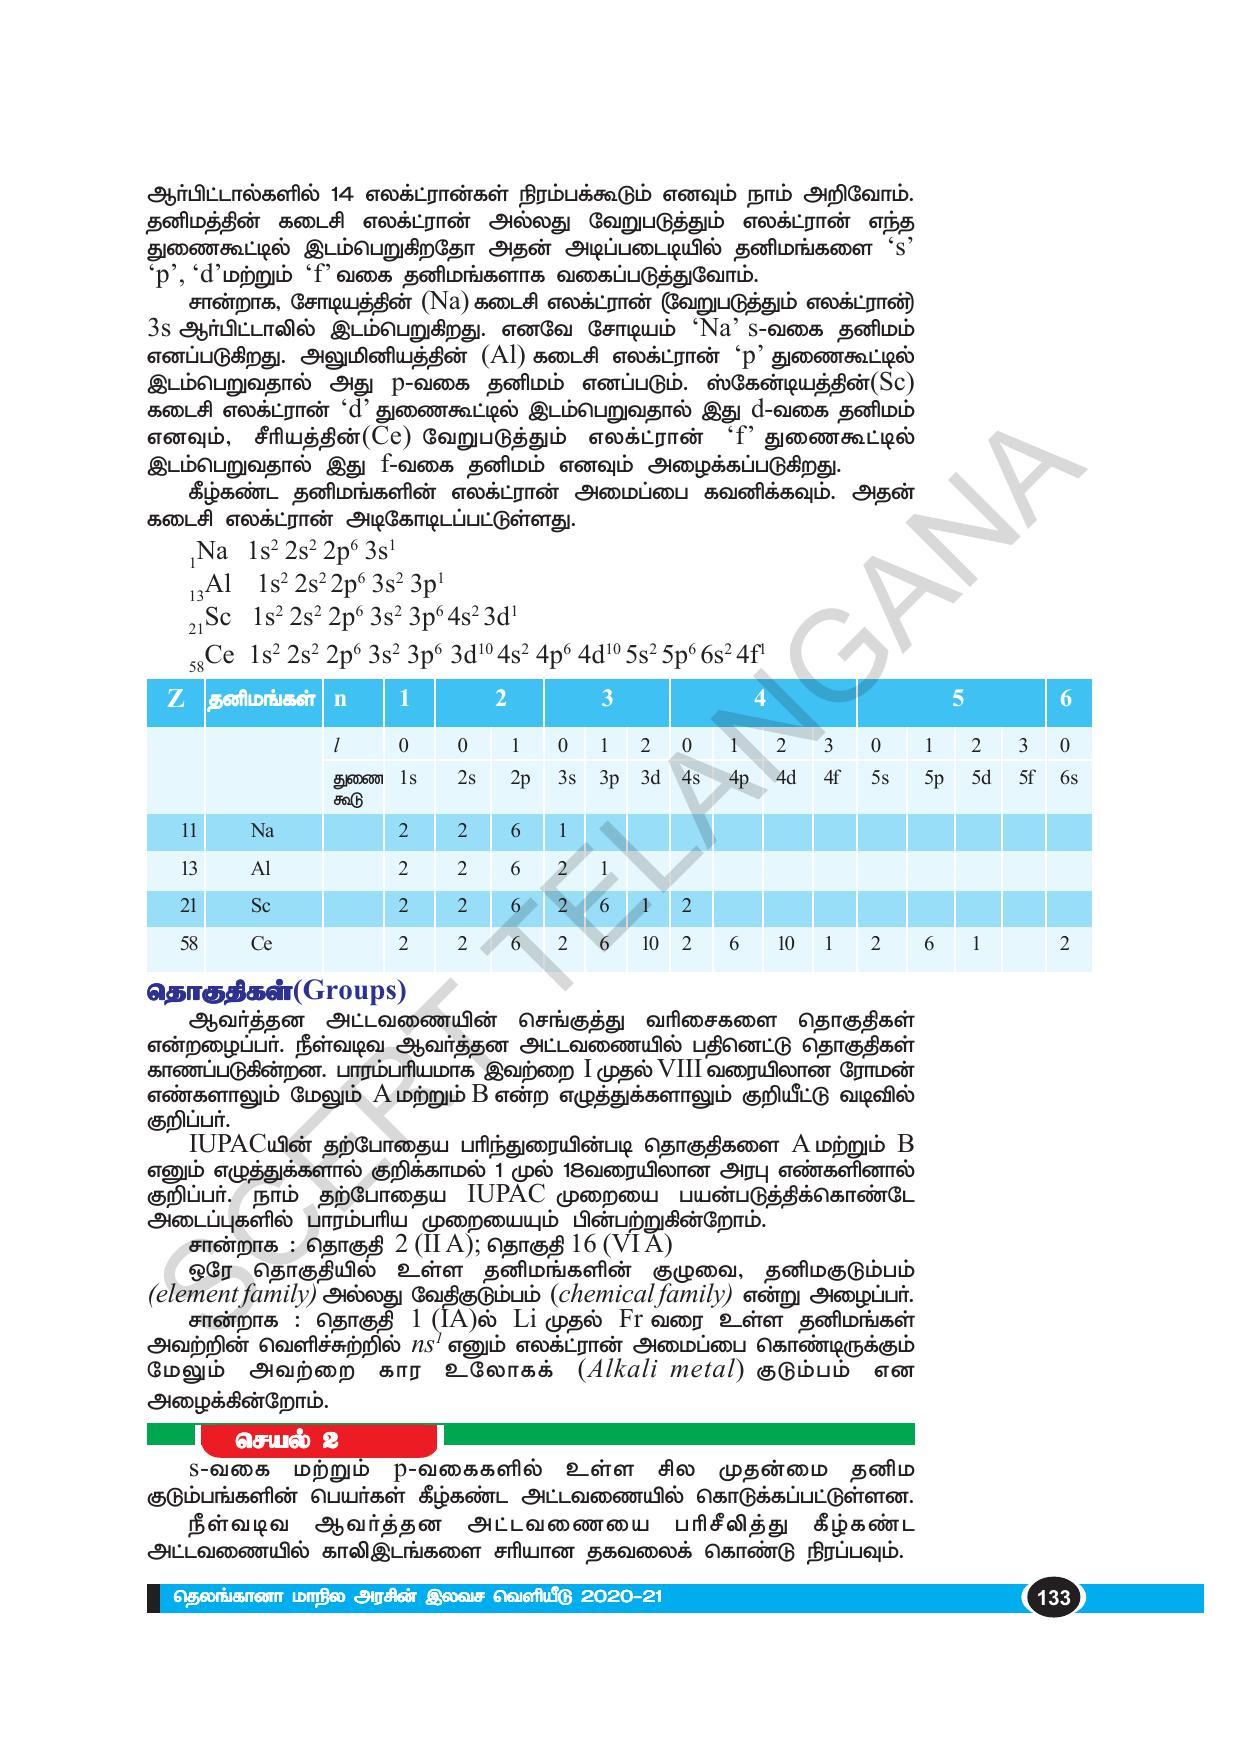 TS SCERT Class 10 Physical Science(Tamil Medium) Text Book - Page 145